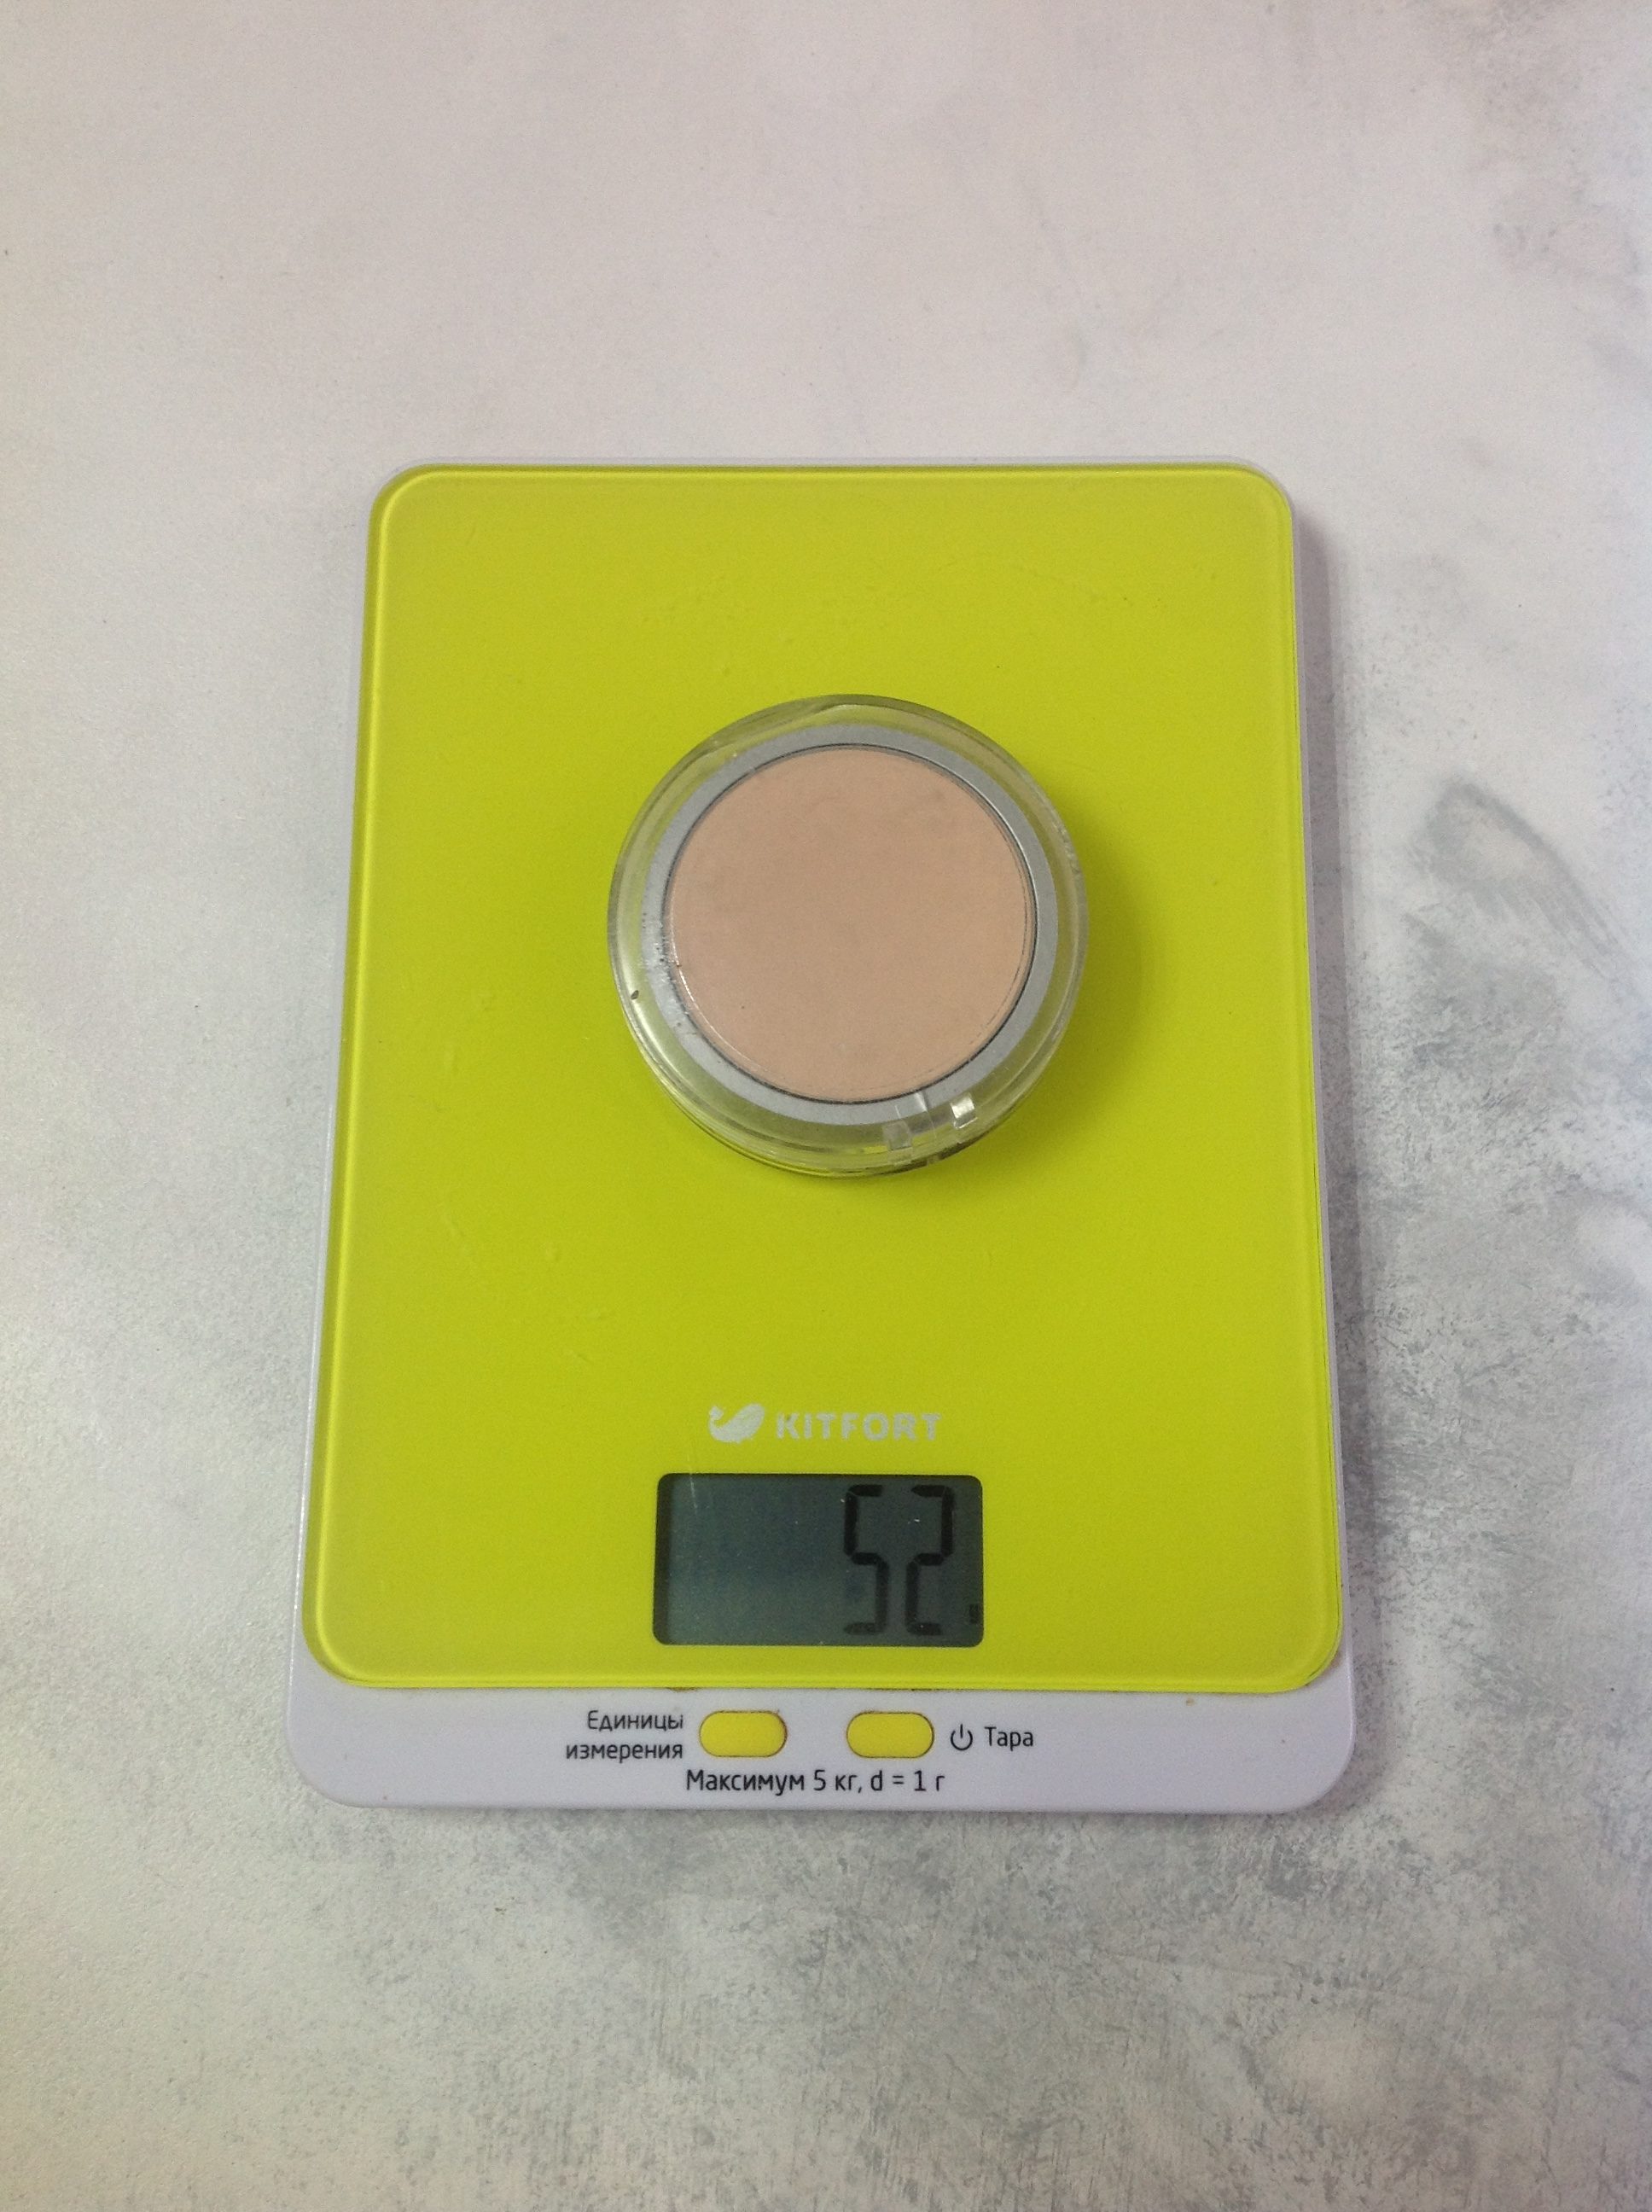 the weight of the compact powder